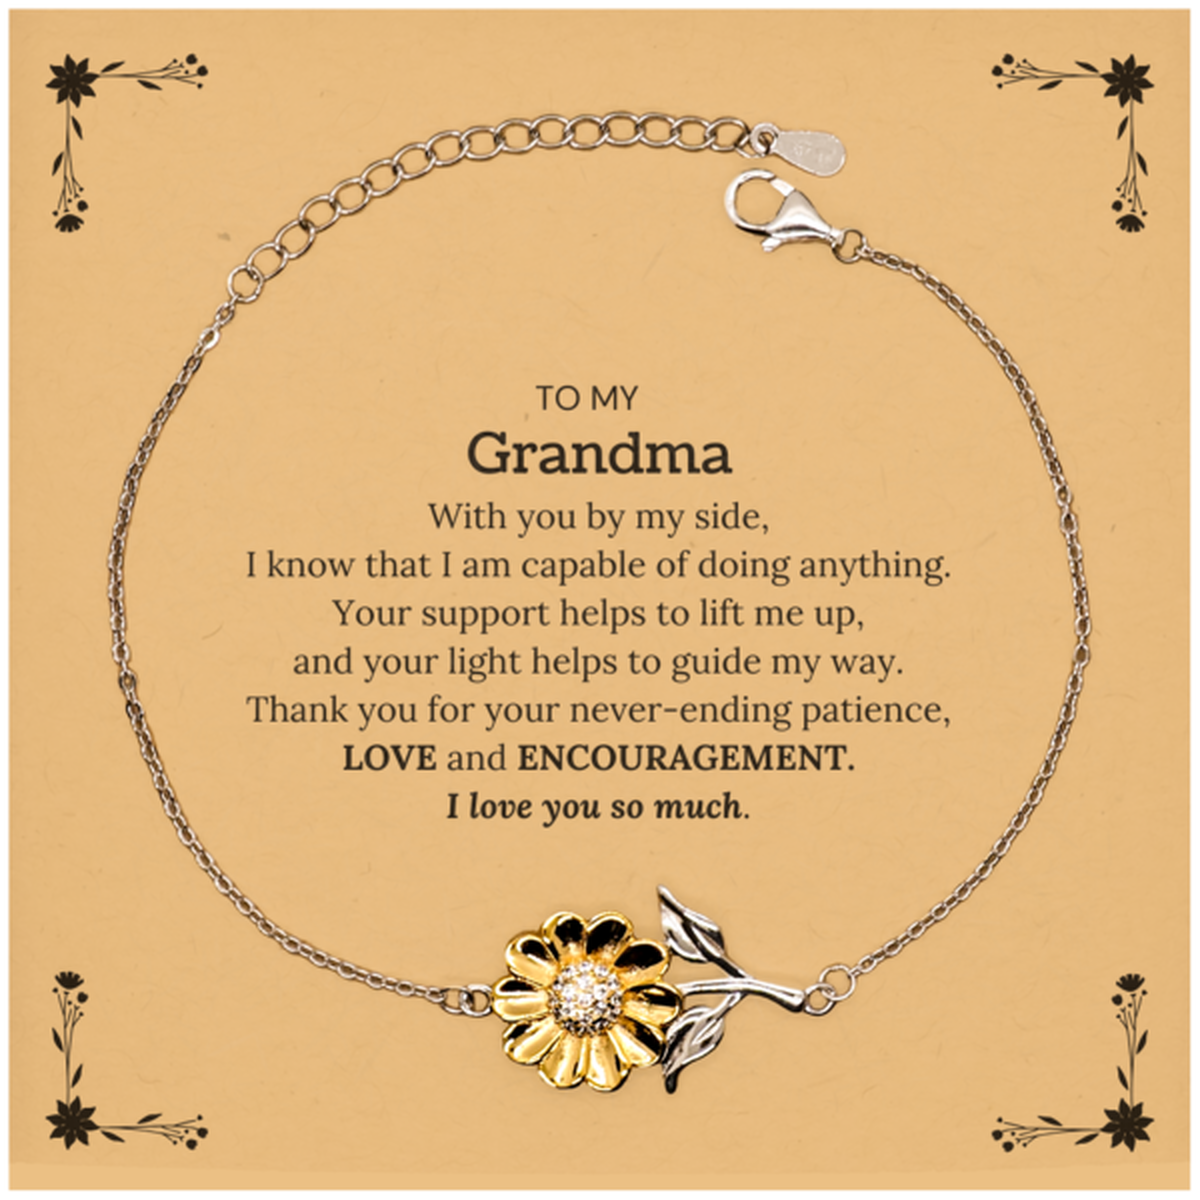 Appreciation Grandma Sunflower Bracelet Gifts, To My Grandma Birthday Christmas Wedding Keepsake Gifts for Grandma With you by my side, I know that I am capable of doing anything. I love you so much